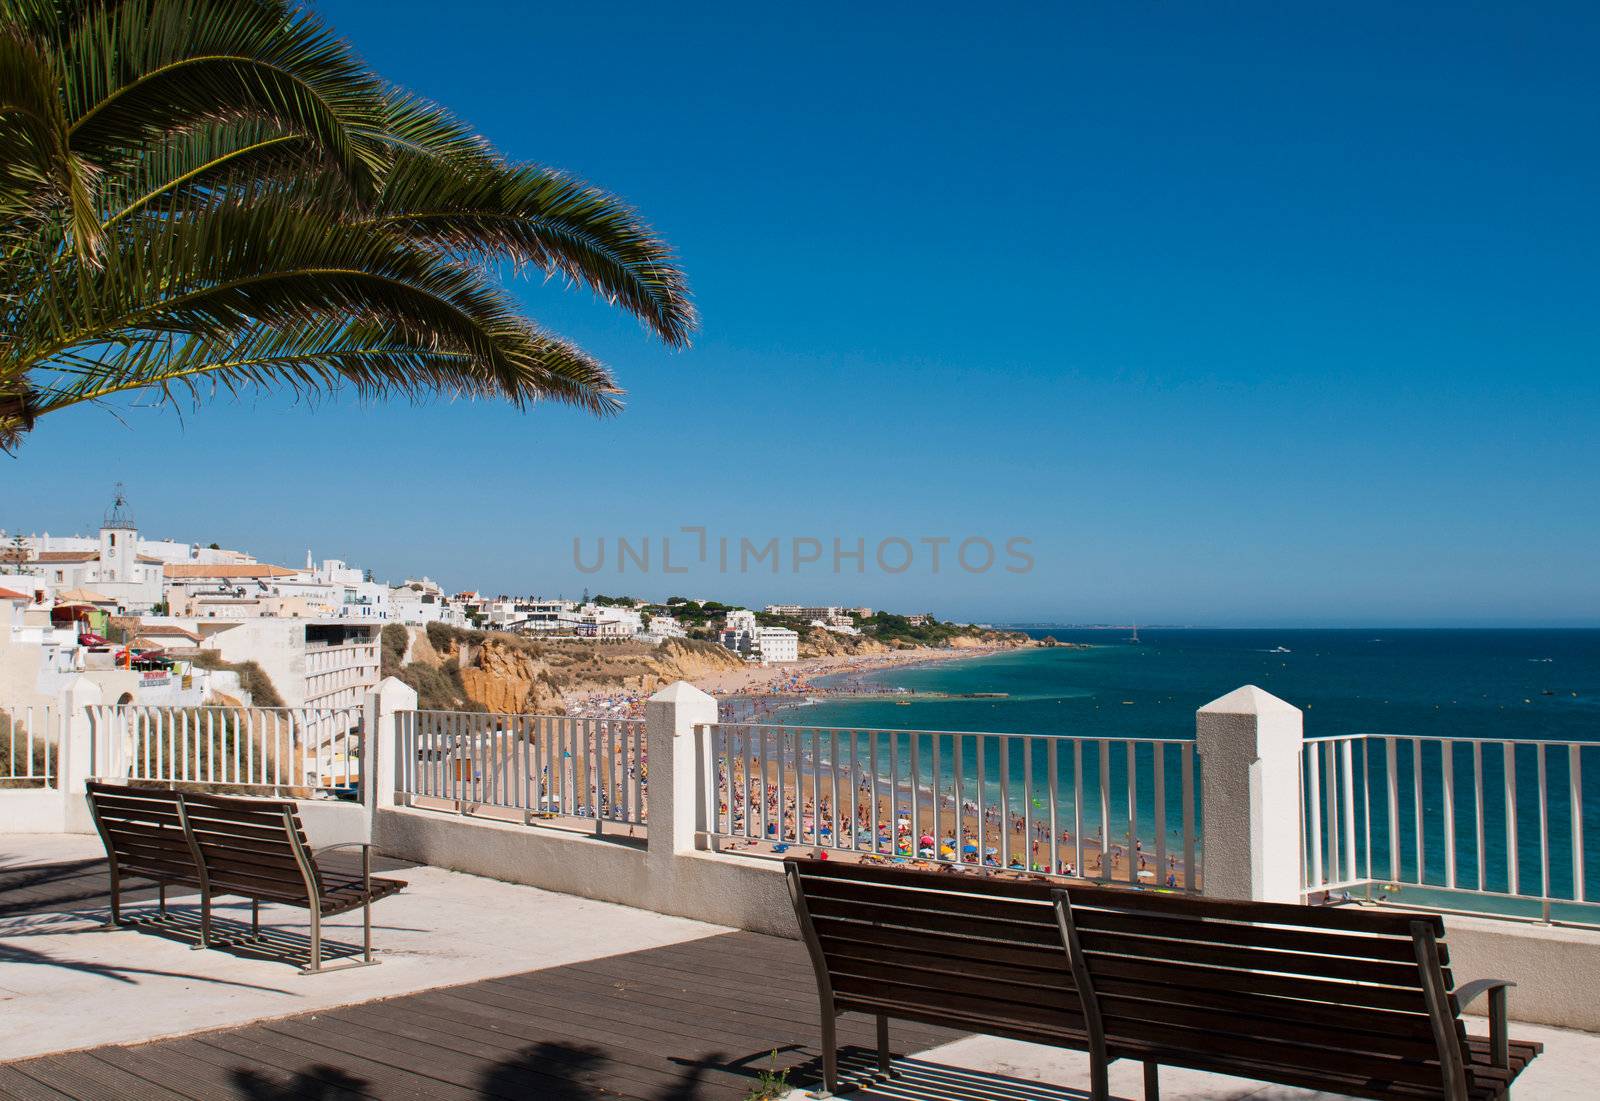 stunning Albufeira beach view in Algarve, Portugal (focus on the foreground)